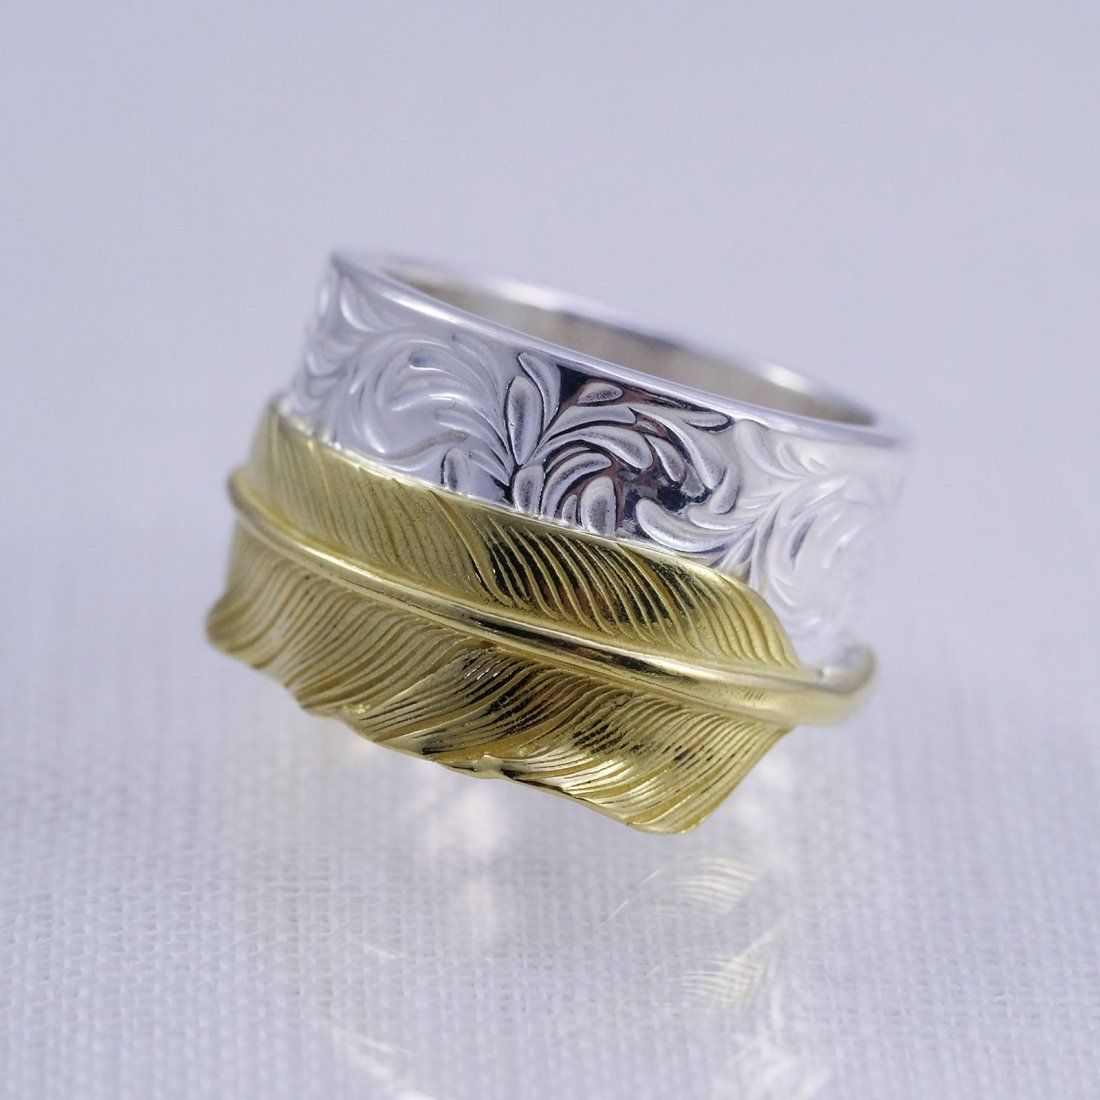 STUDIO T&Y - K18 Feather Ring 1 (GOLD/SILVER) / 18金フェザー&唐草 